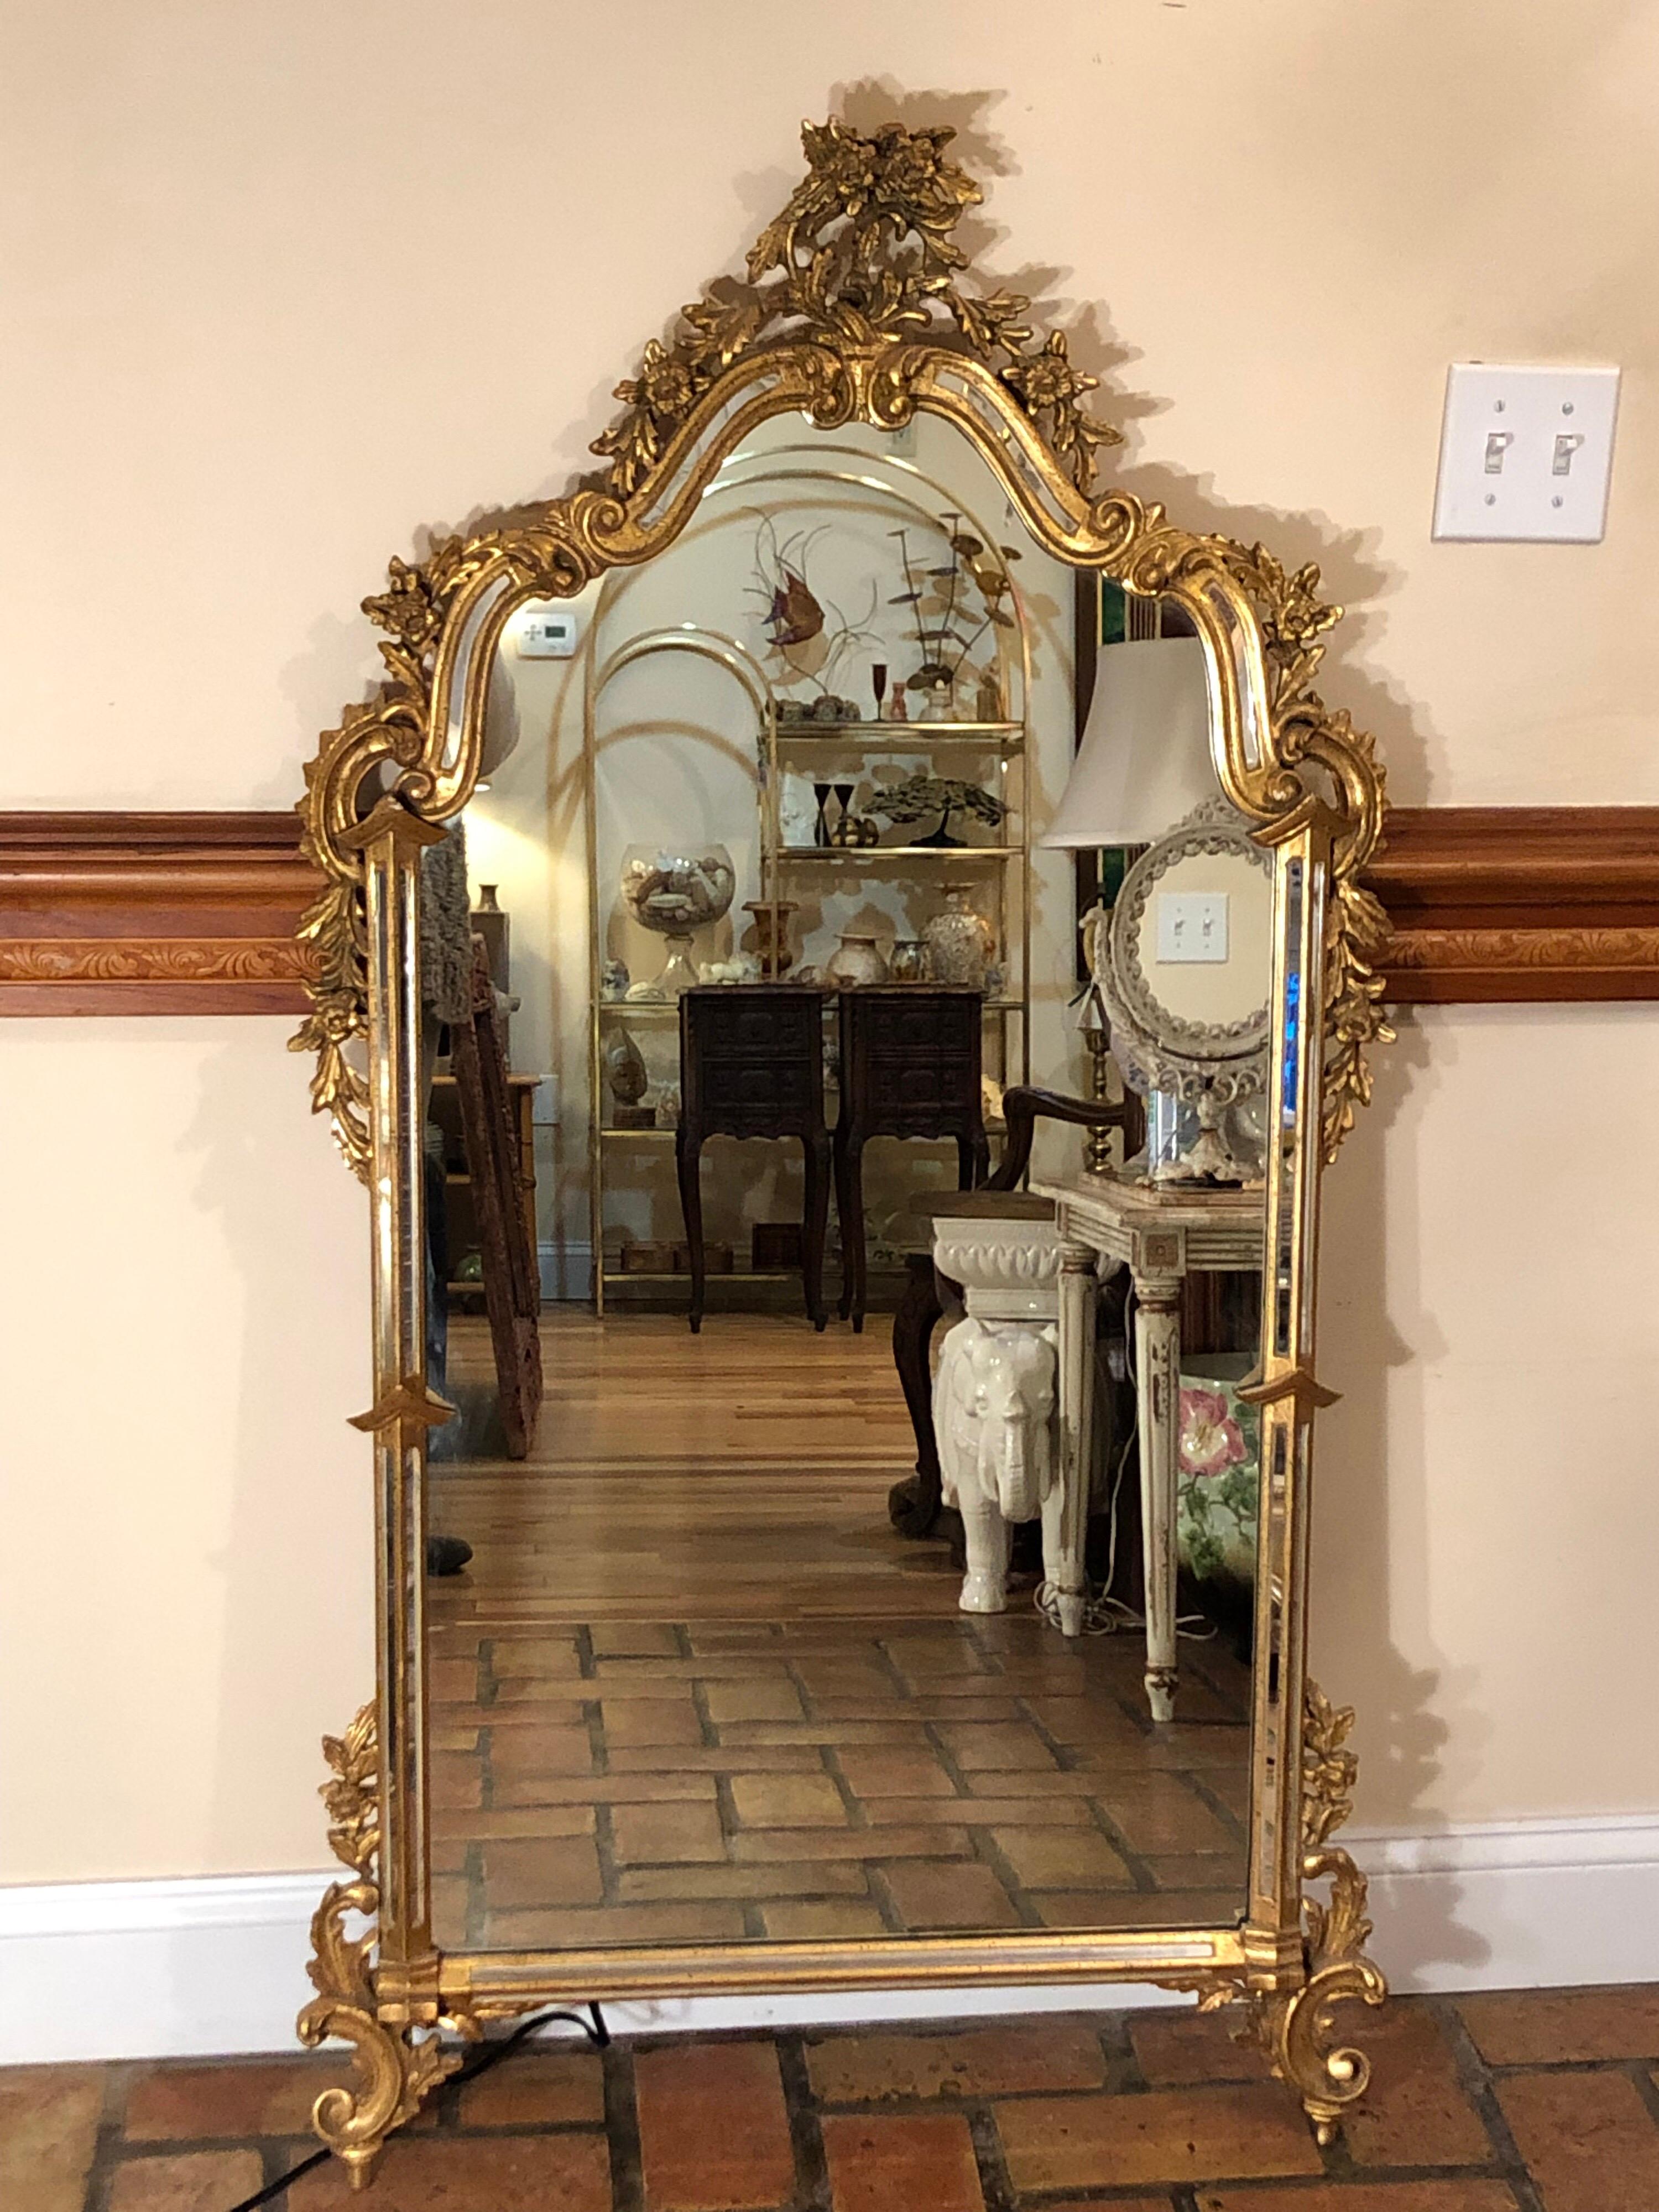 Vintage ornate gilt mirror attributed to Labarge. With mirrored sides and intricately carved detail this mirror would appeal to anyone who loves the Baroque or Rococo styles. Gold gilt finish has tiny specks of black in it.
Perfect for an entryway,